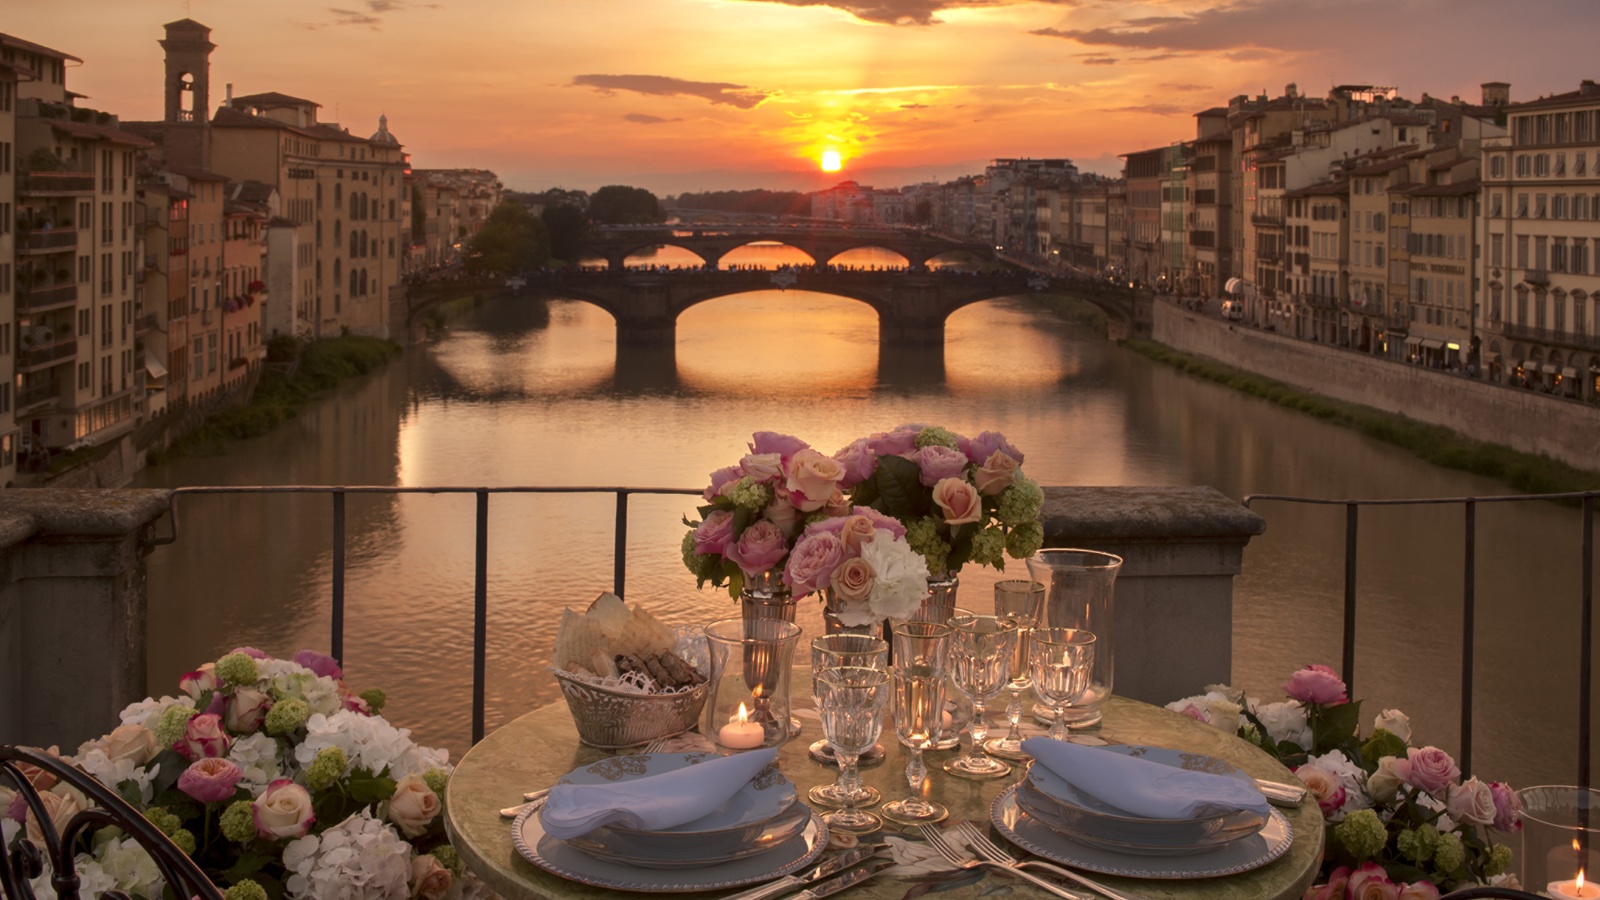 voight Dreaming about a romantic weekend in Florence image: 1